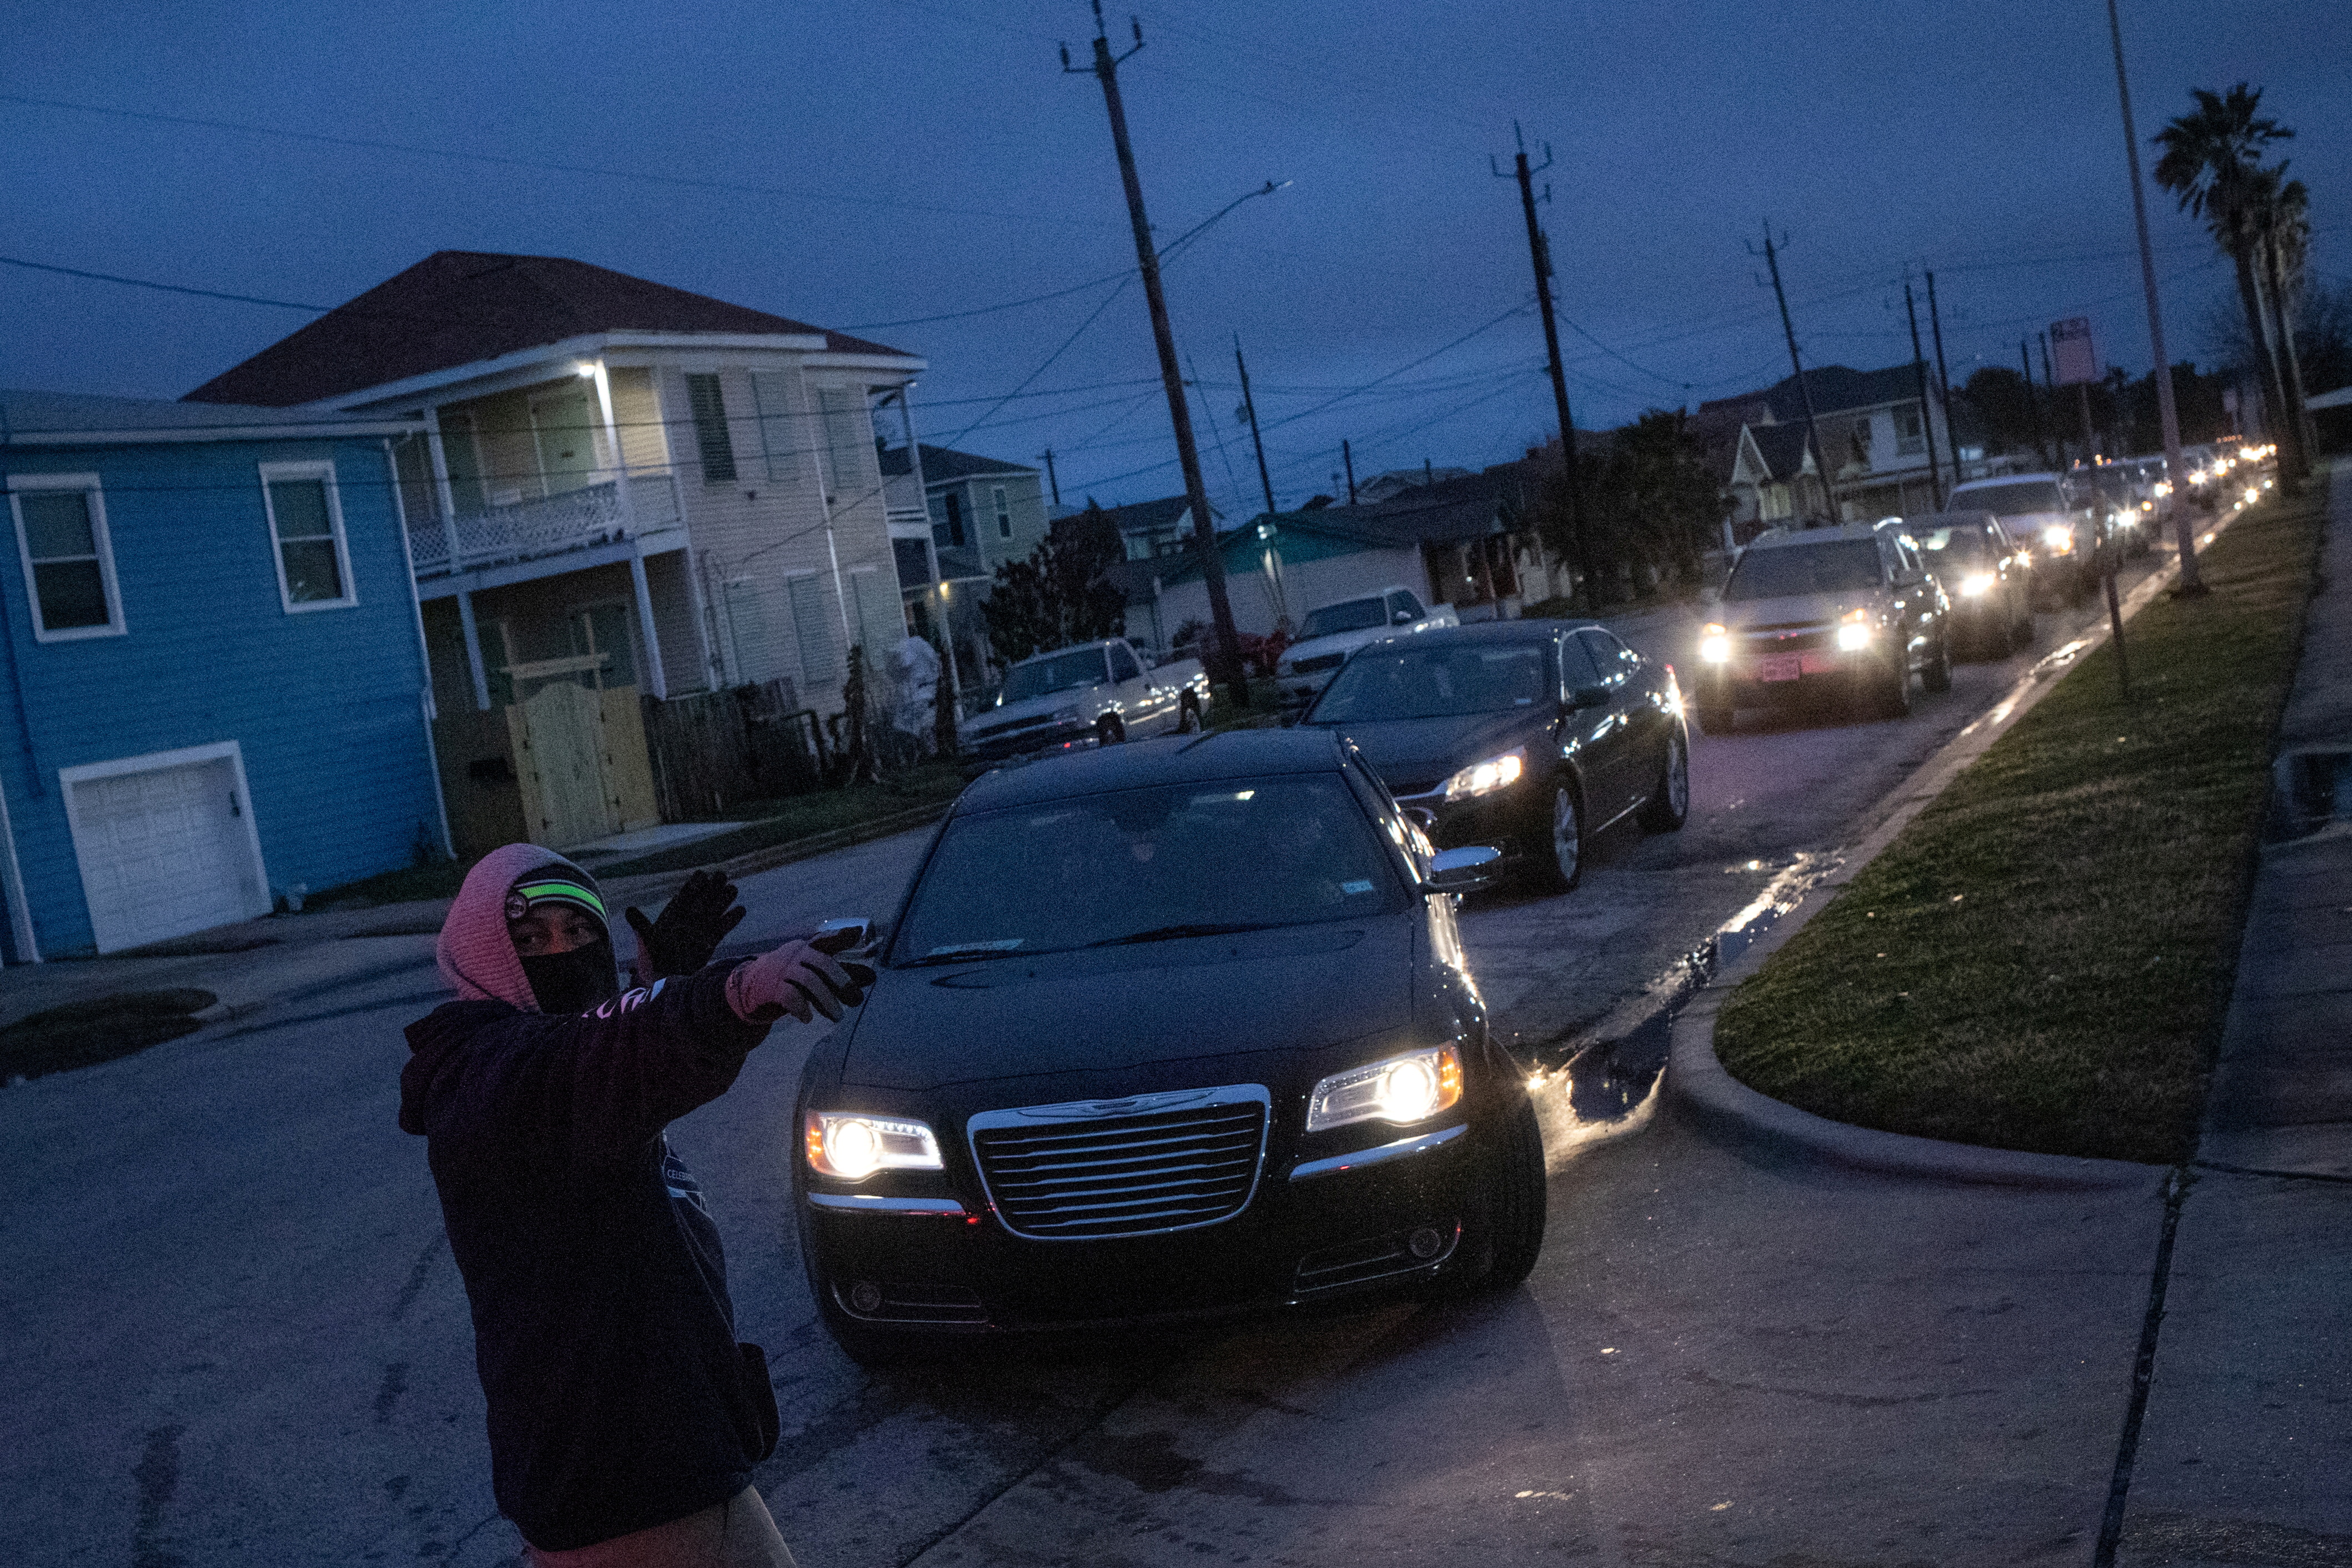 Residents line up to enter shelter after record-breaking winter temperatures in Galveston, Texas